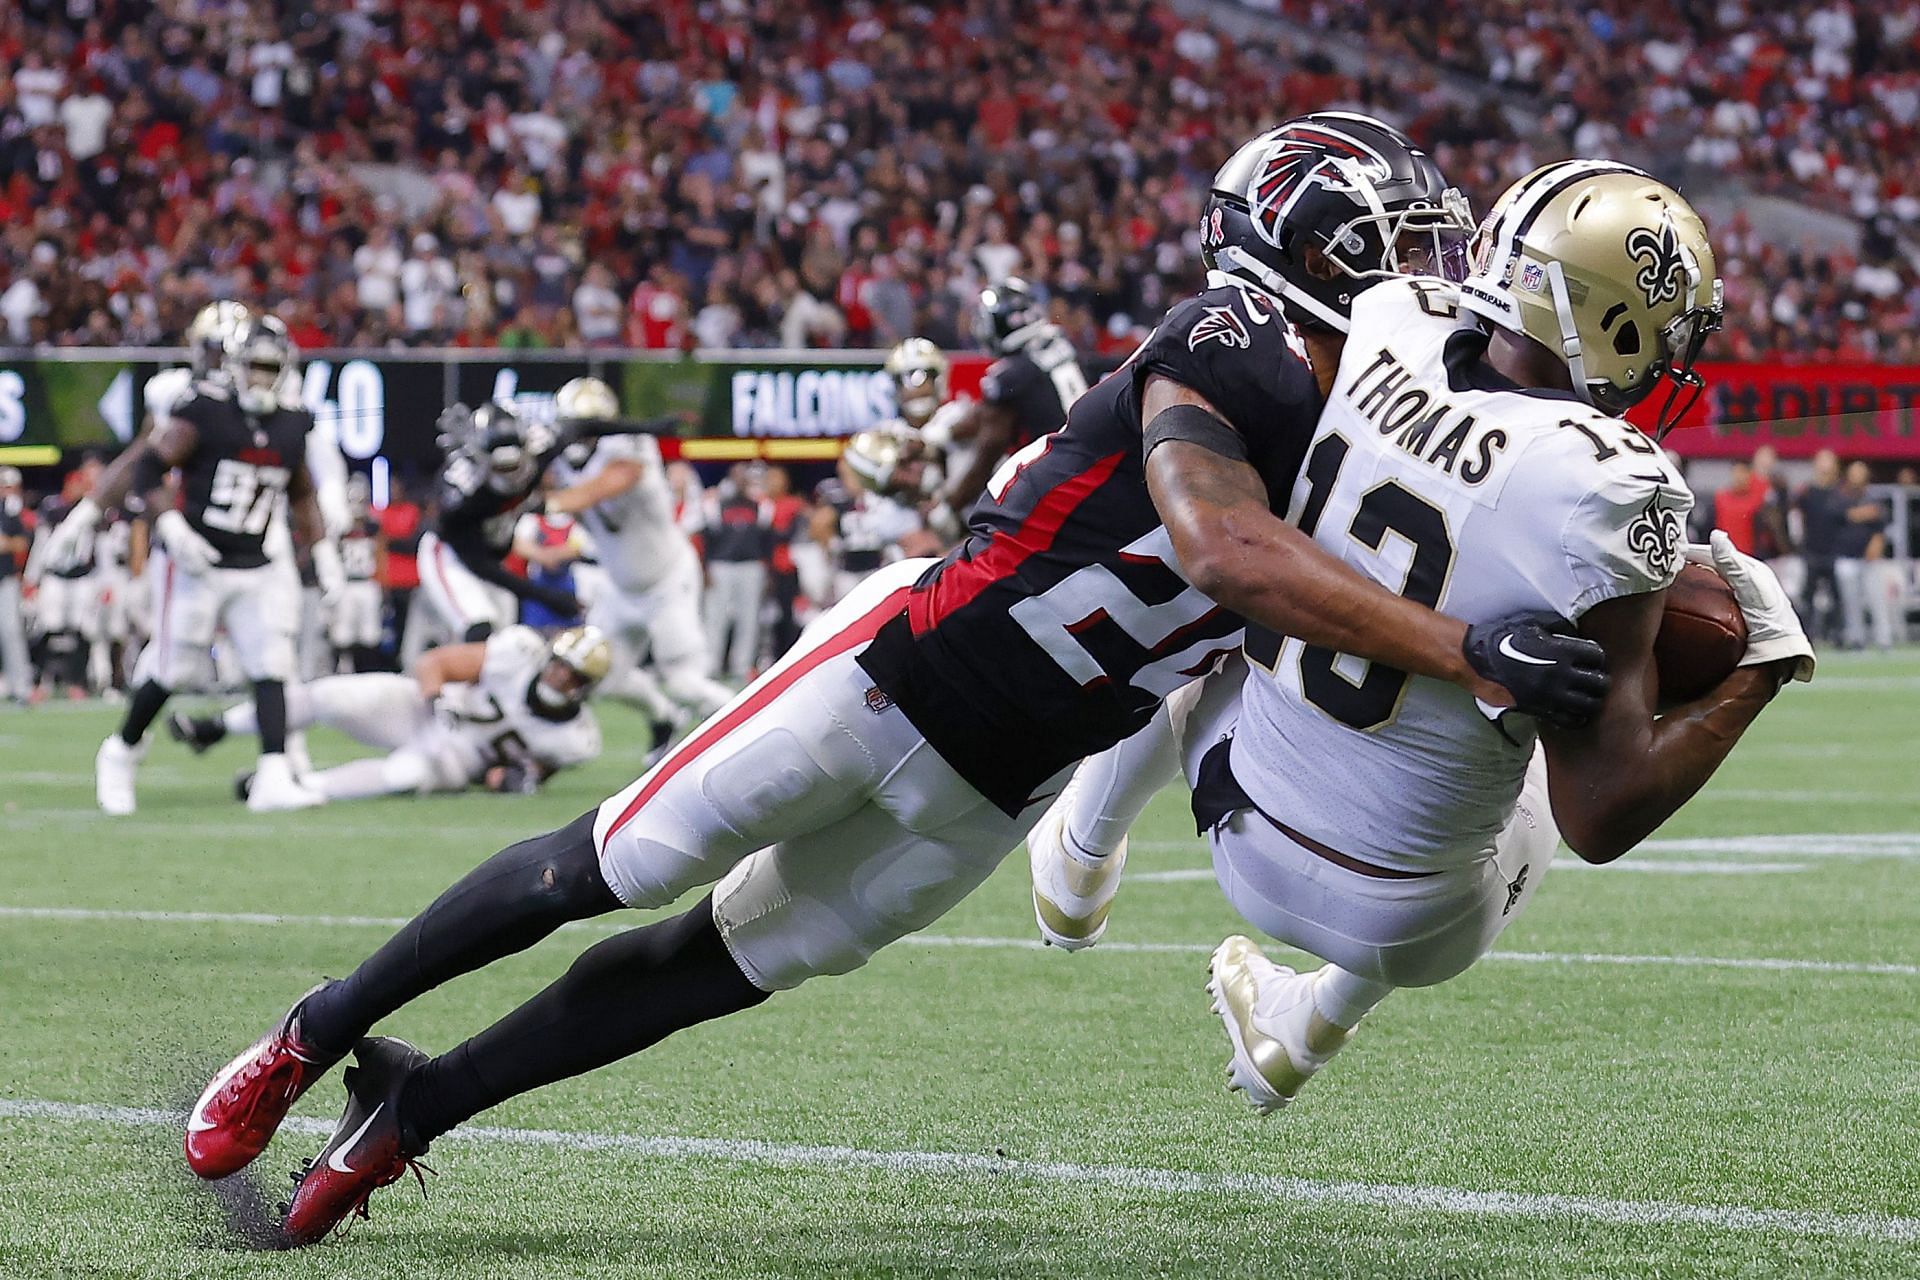 Recapping the Week 1 FalconsSaints game